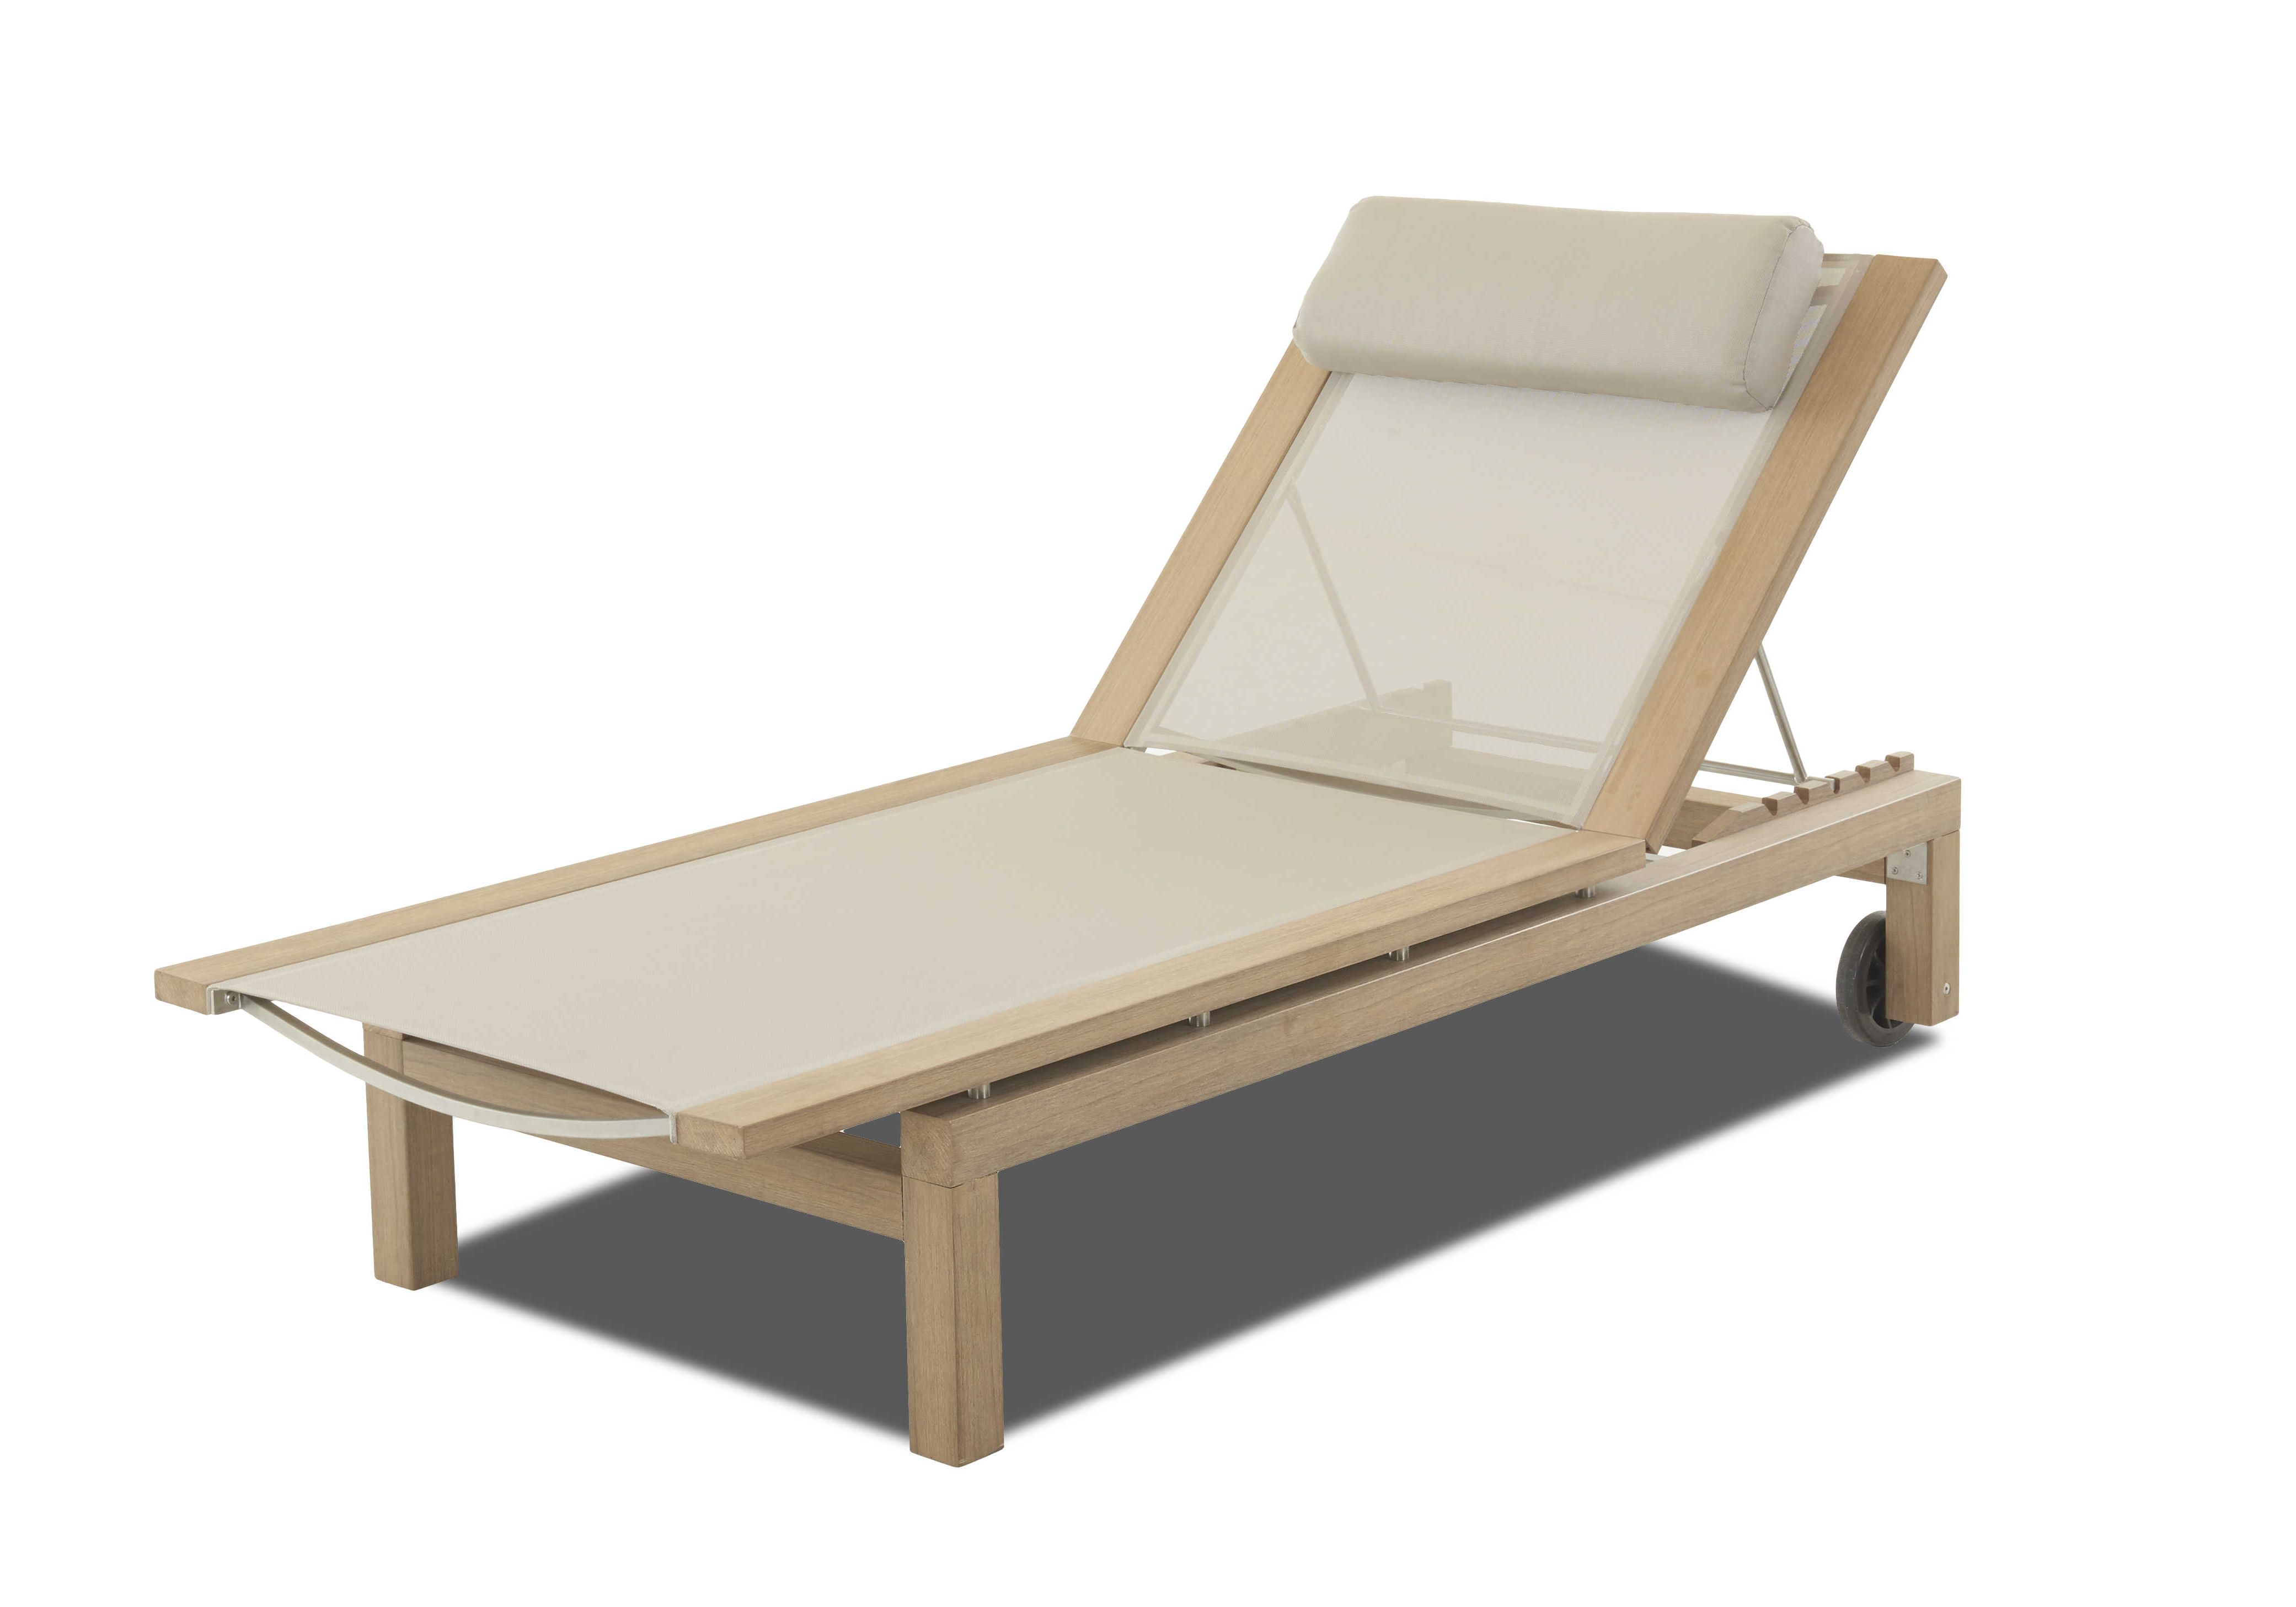 Favorite Eucalyptus Teak Finish Outdoor Chaise Loungers With Cushion Intended For Klaussner Delray Wood Sling Chaise Lounge (View 19 of 25)